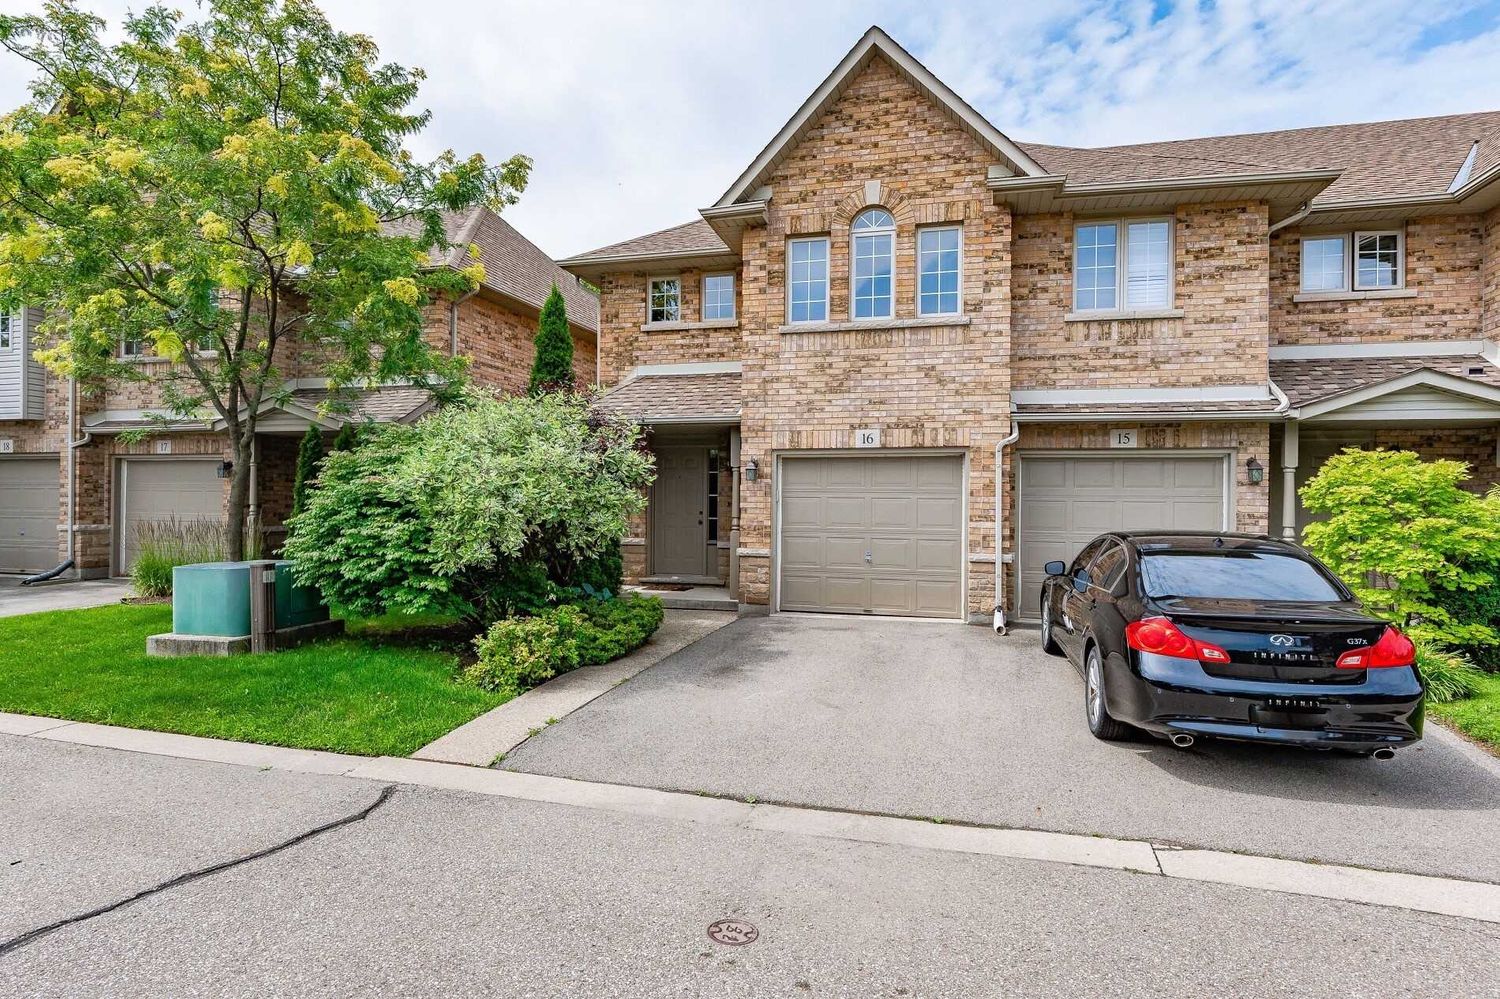 1276 Silvan Forest Drive. 1276 Silvan Forest Drive Townhomes is located in  Burlington, Toronto - image #2 of 2